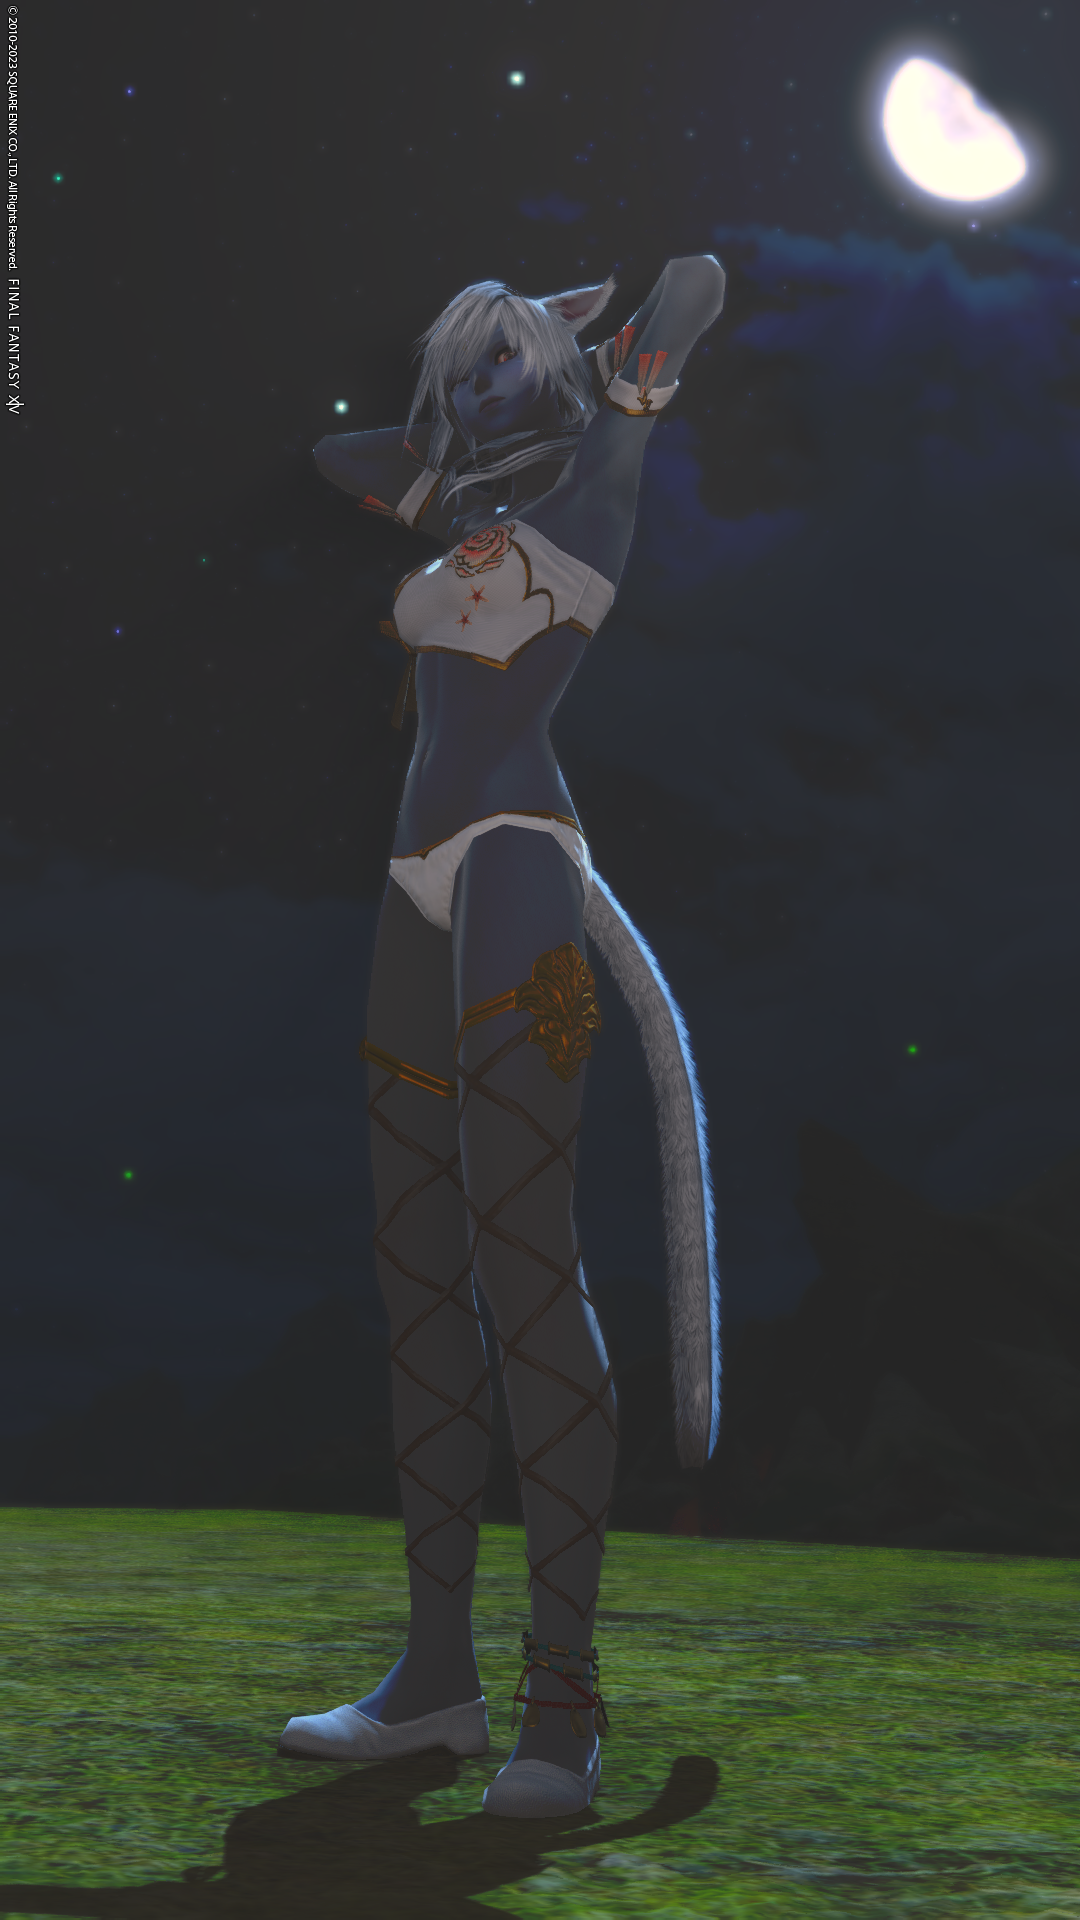 An image of a Miqote from FFXIV. She is wearing a bathing suit and standing in the moon light.